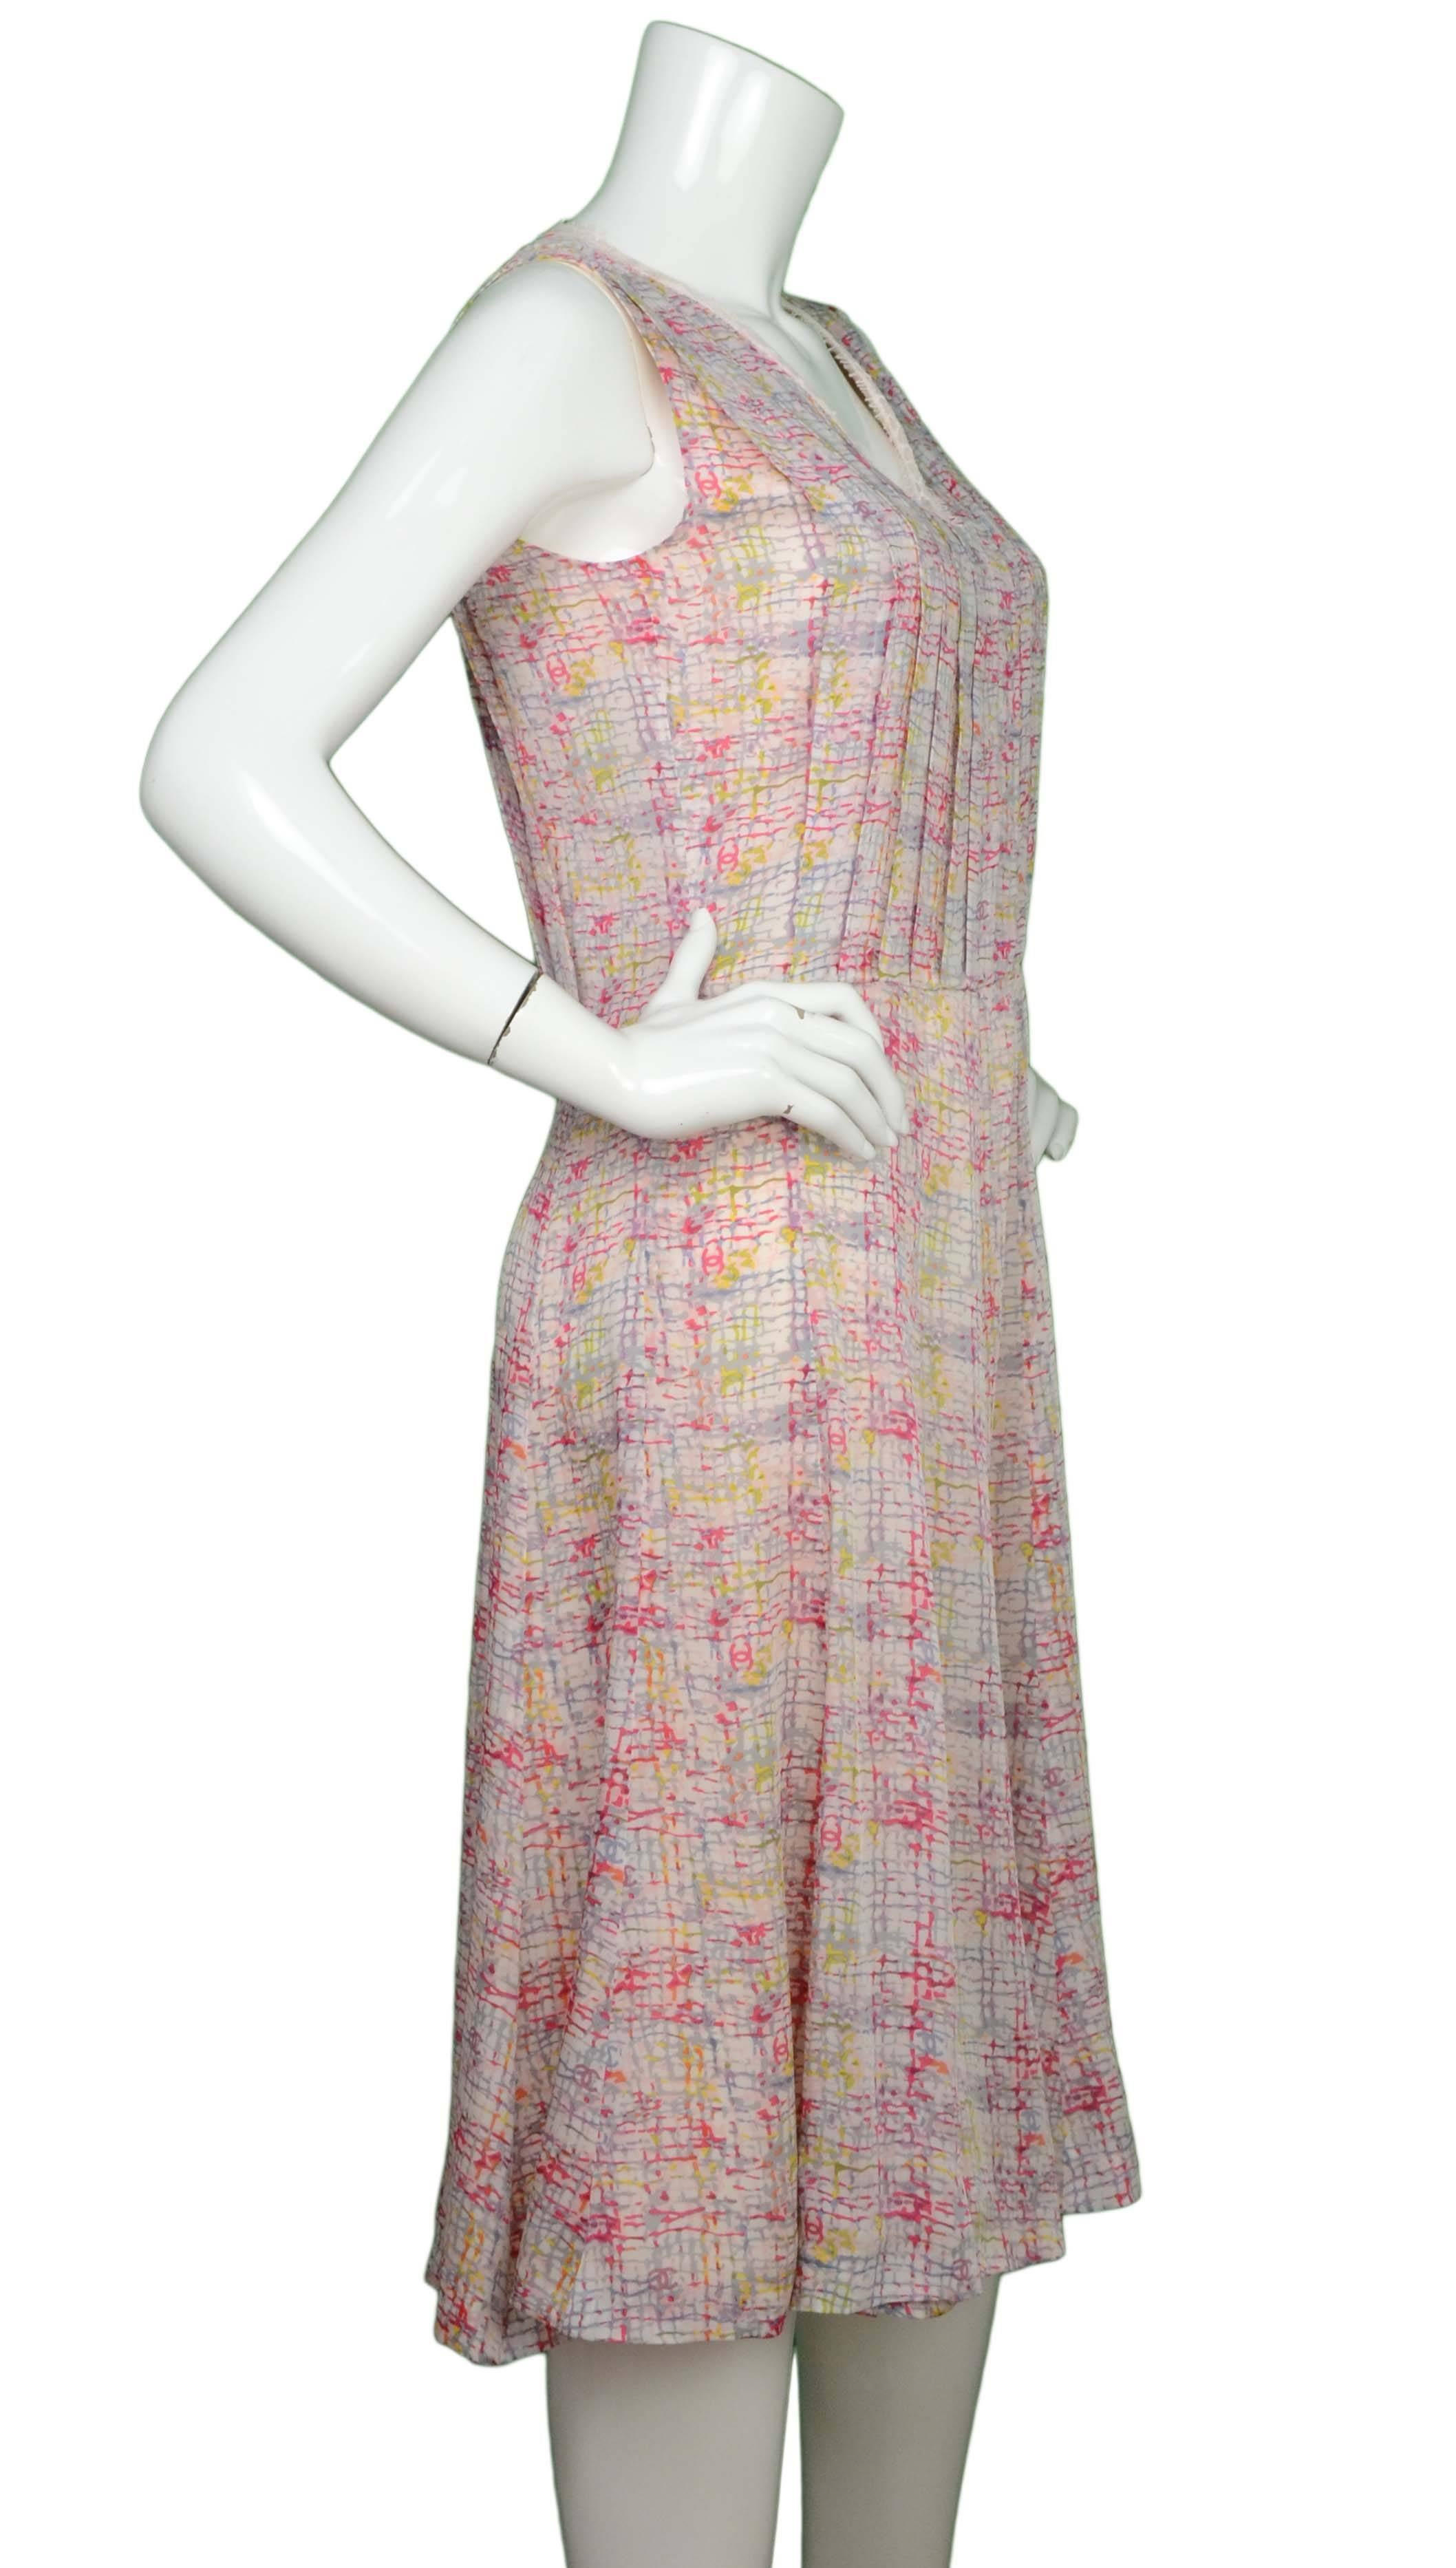 Chanel Multi-Color Silk Sleeveless Dress 
Features pink lace trim at neckline
Made In: France
Year of Production: 2005
Color: Pink, red, grey, blue, orange and yellow
Composition: 100% silk
Lining: Pink, 100% silk
Closure/Opening: Back center